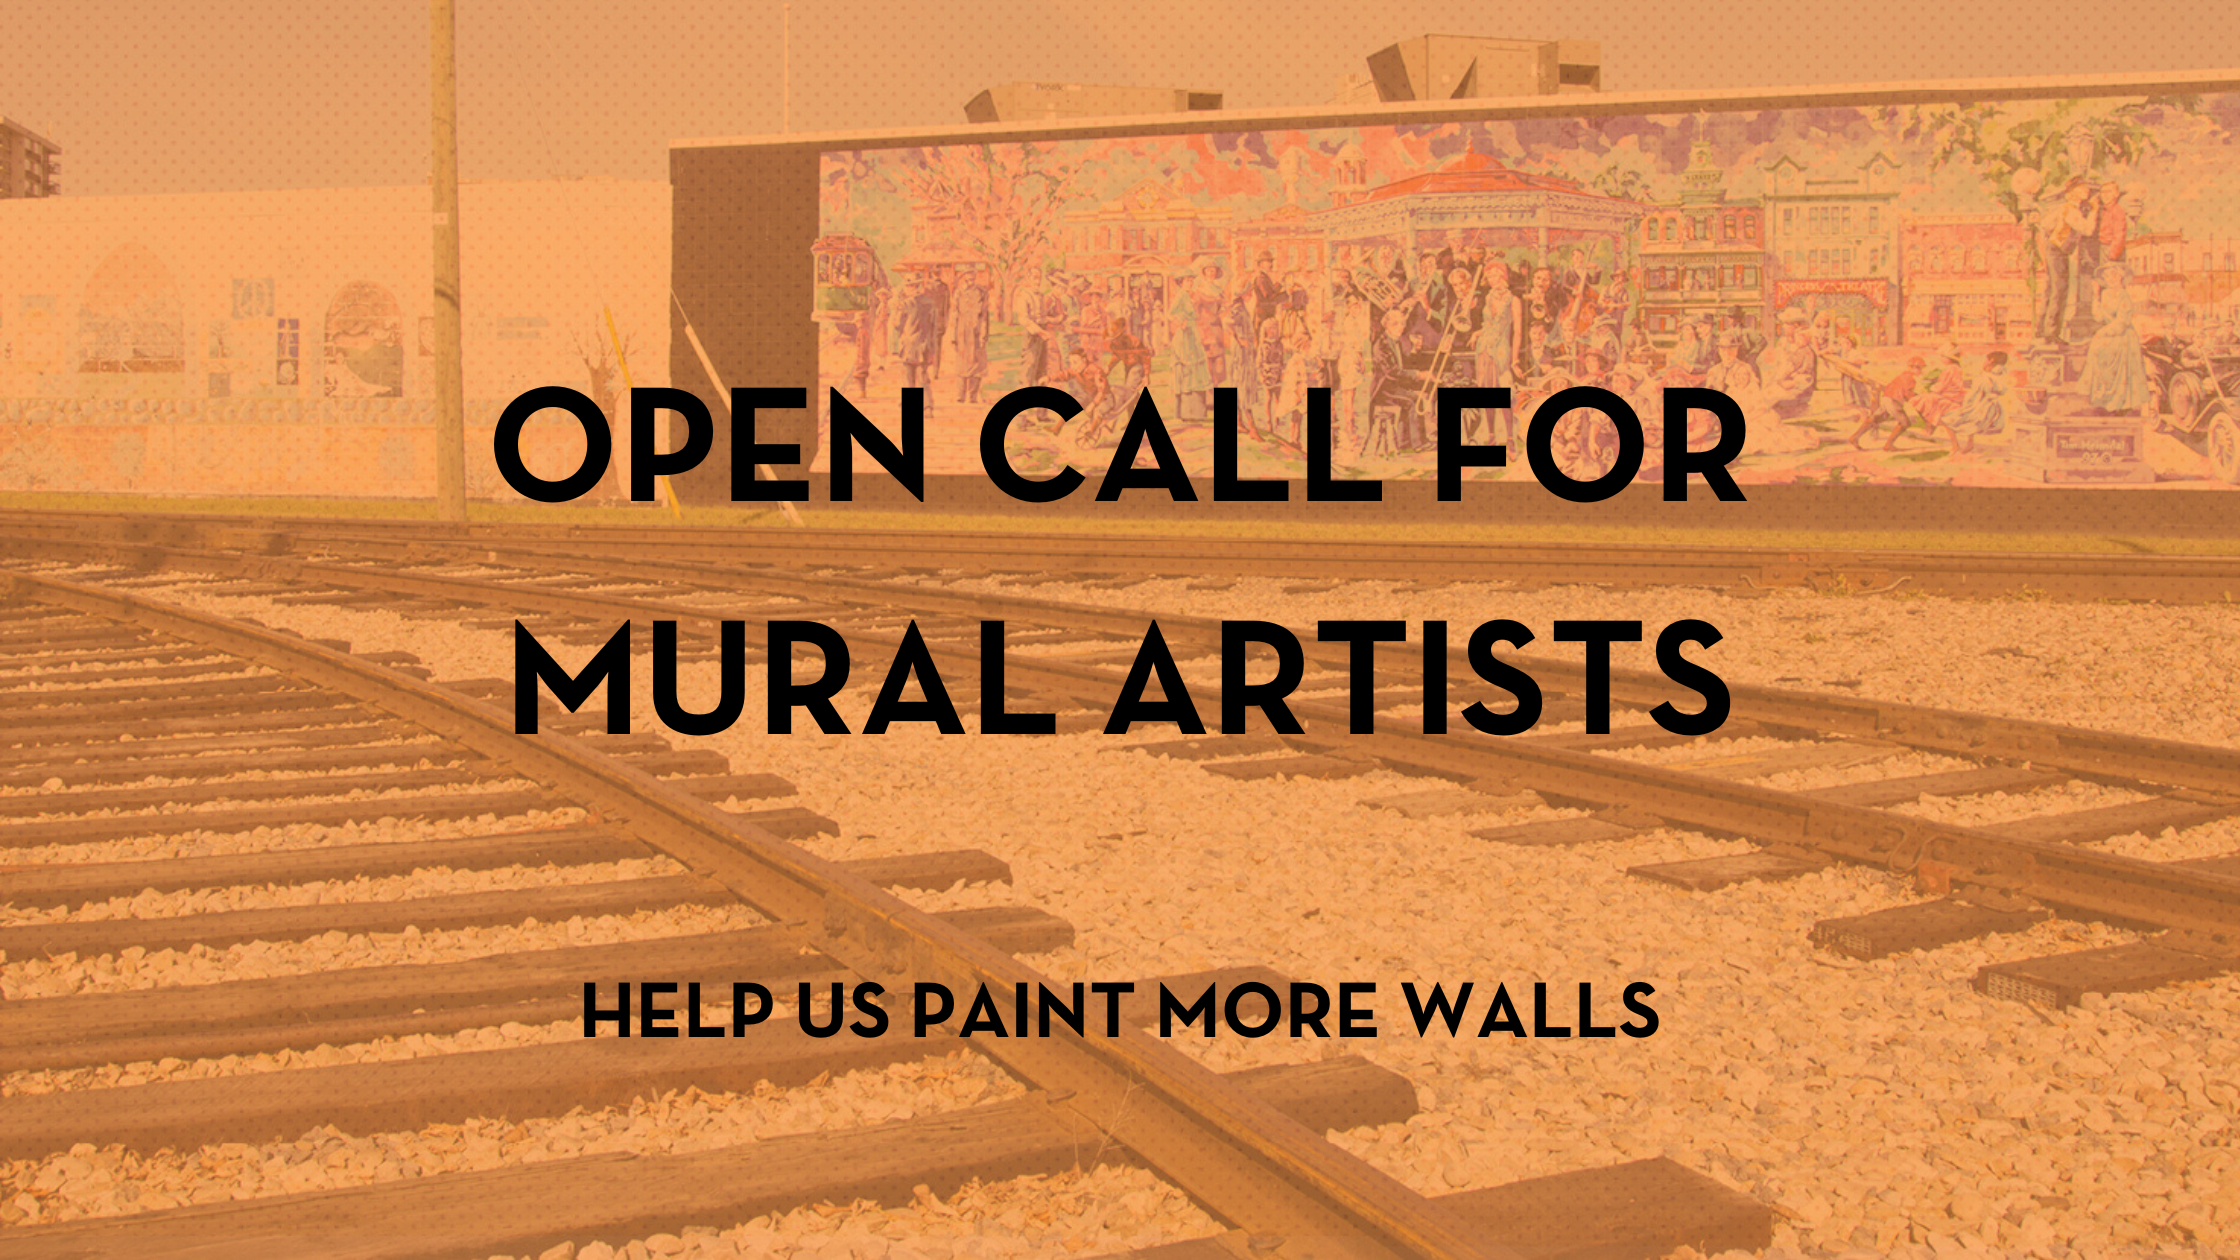 A mural in the background, orange overlay, text reads "Open call for mural artists, help us paint more walls: